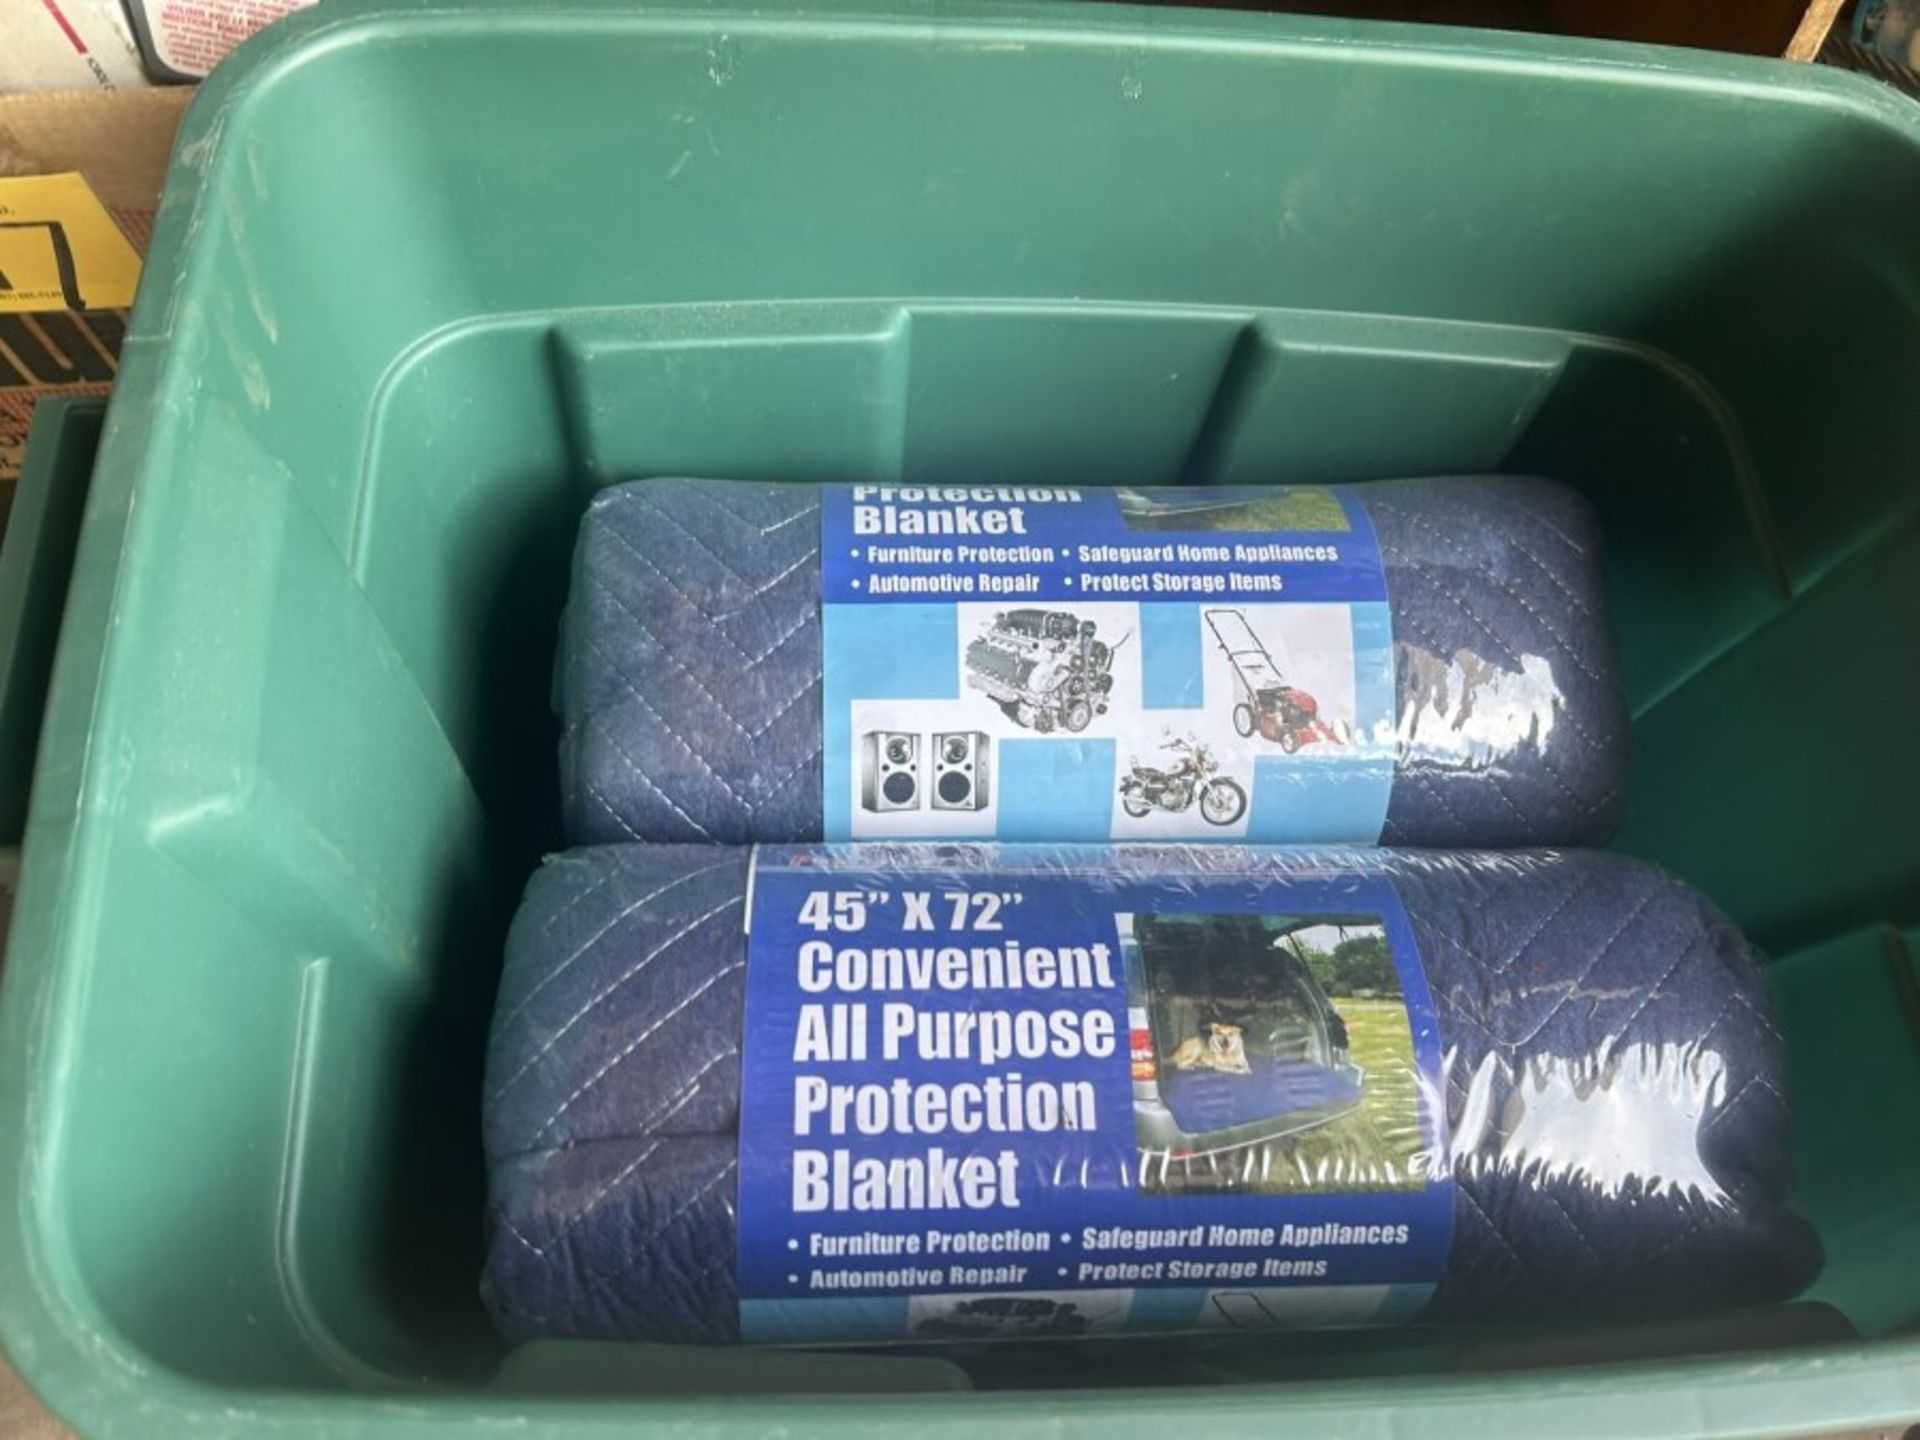 2-45"X72" ALL PURPOSE PROTECTION BLANKETS